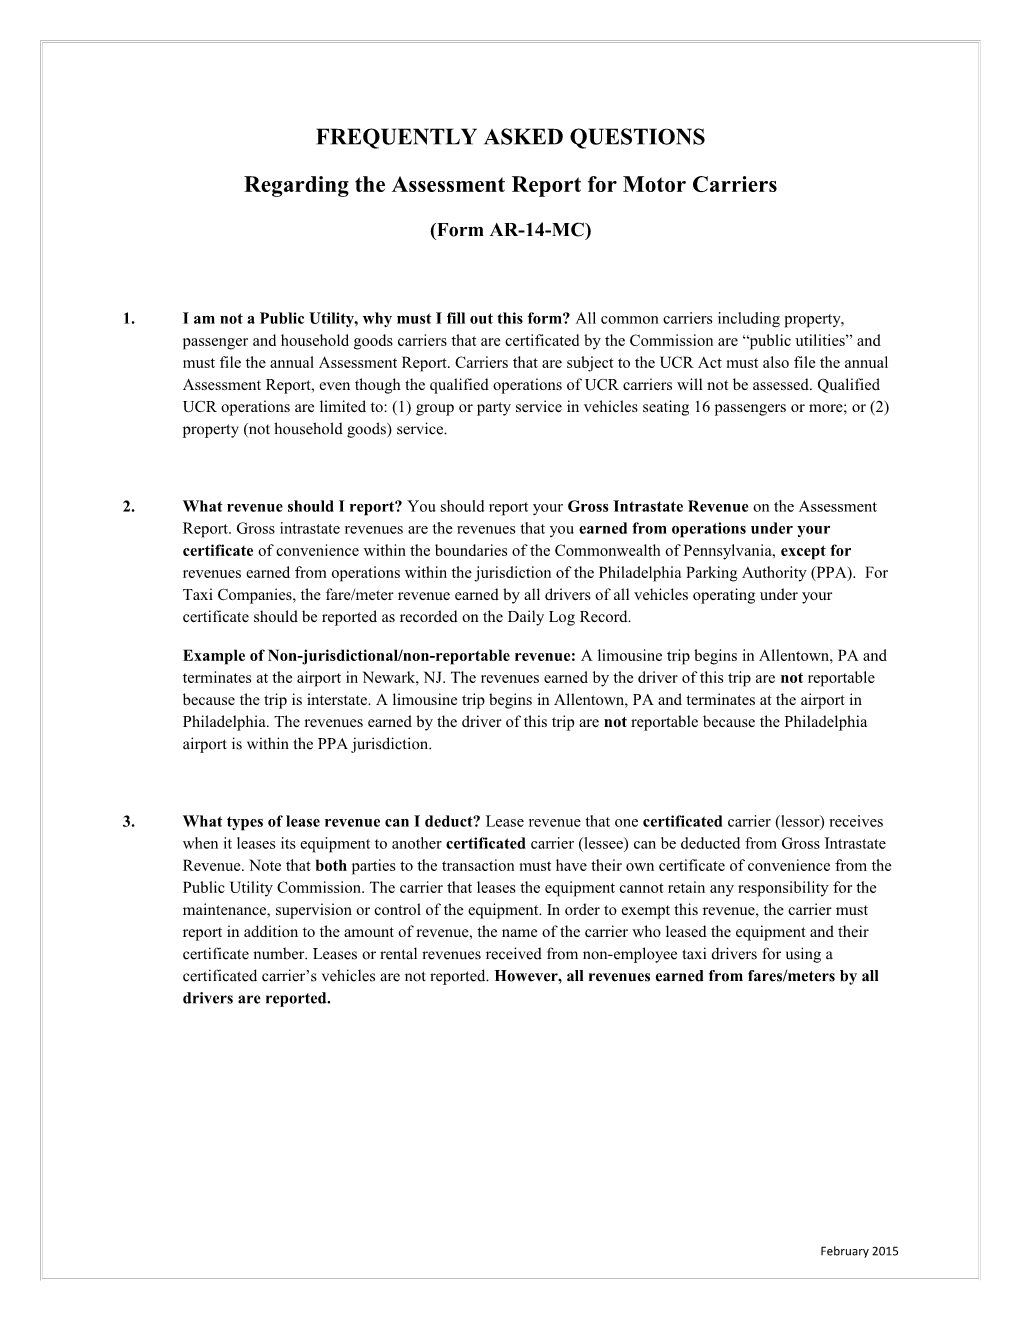 Regarding the Assessment Report for Motor Carriers